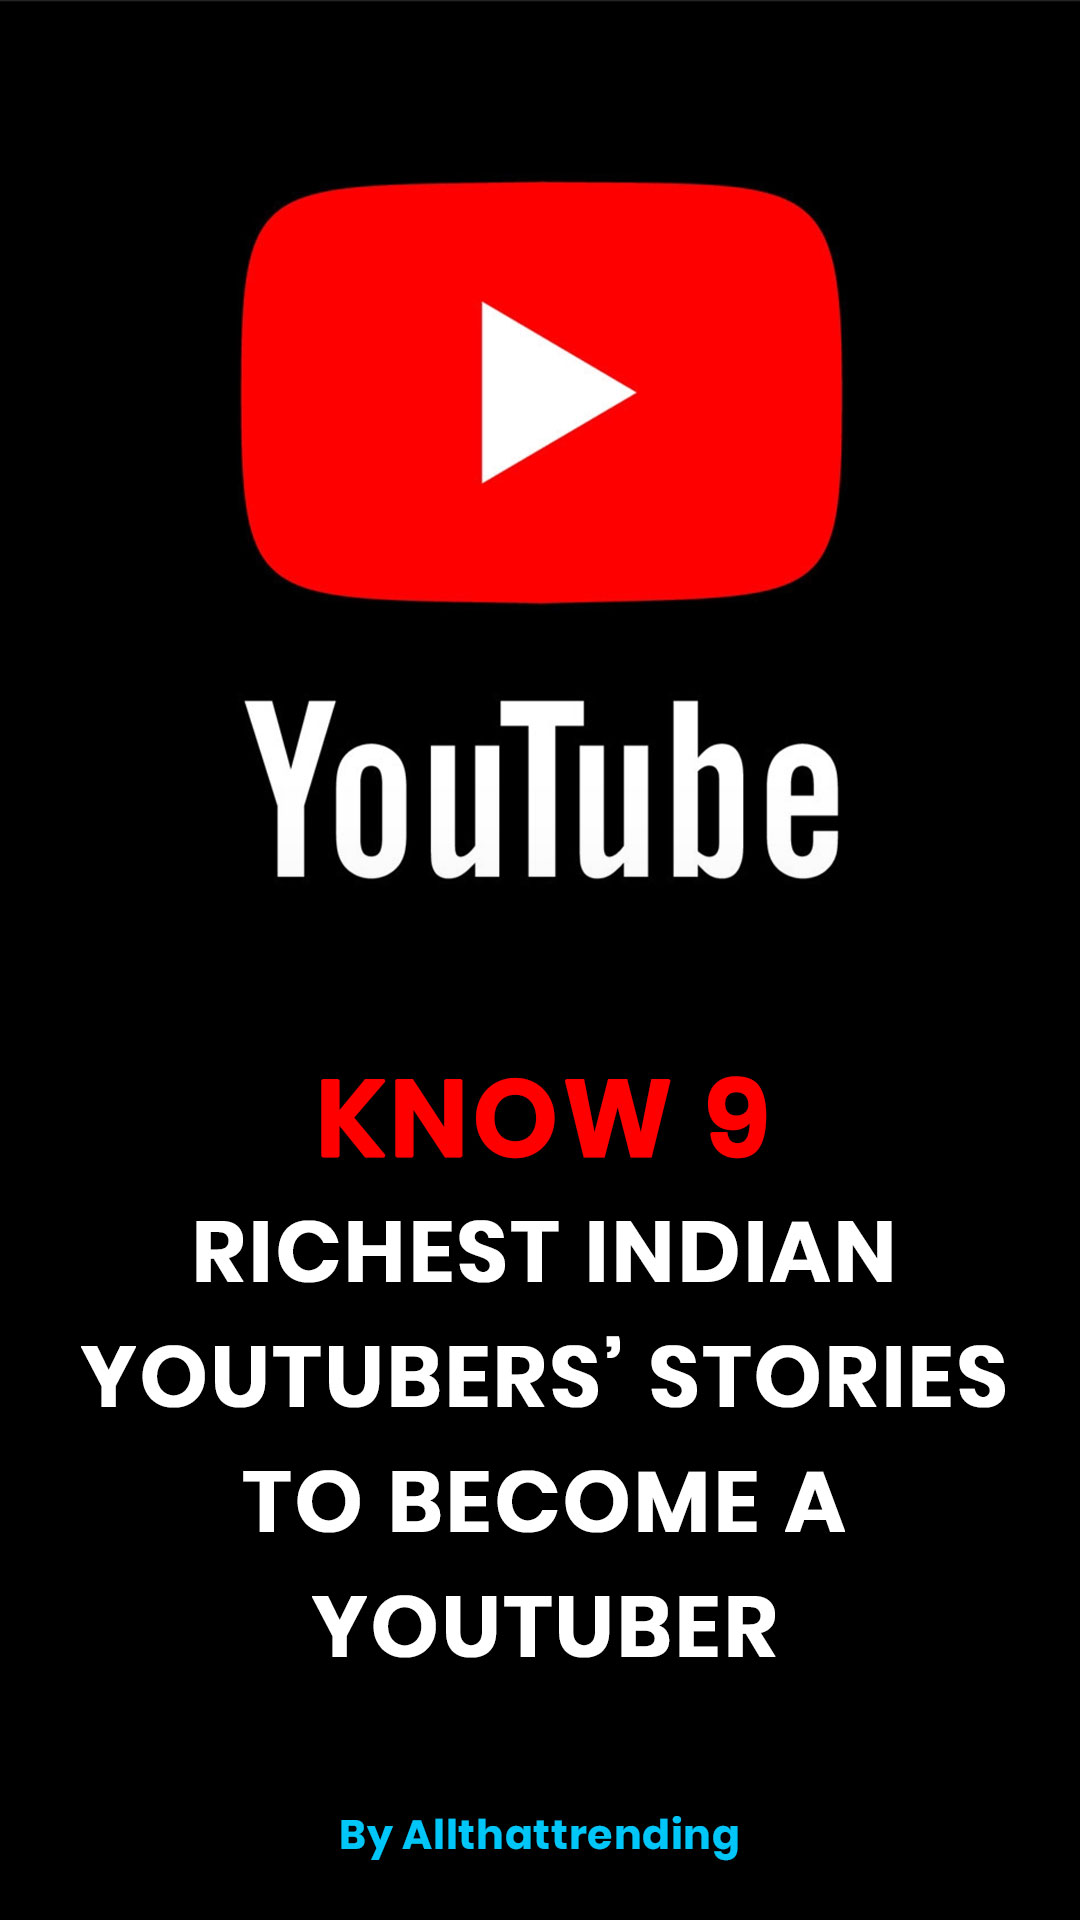 Inspiring Stories Of 9 Richest Indian YouTubers And Their Net Worth